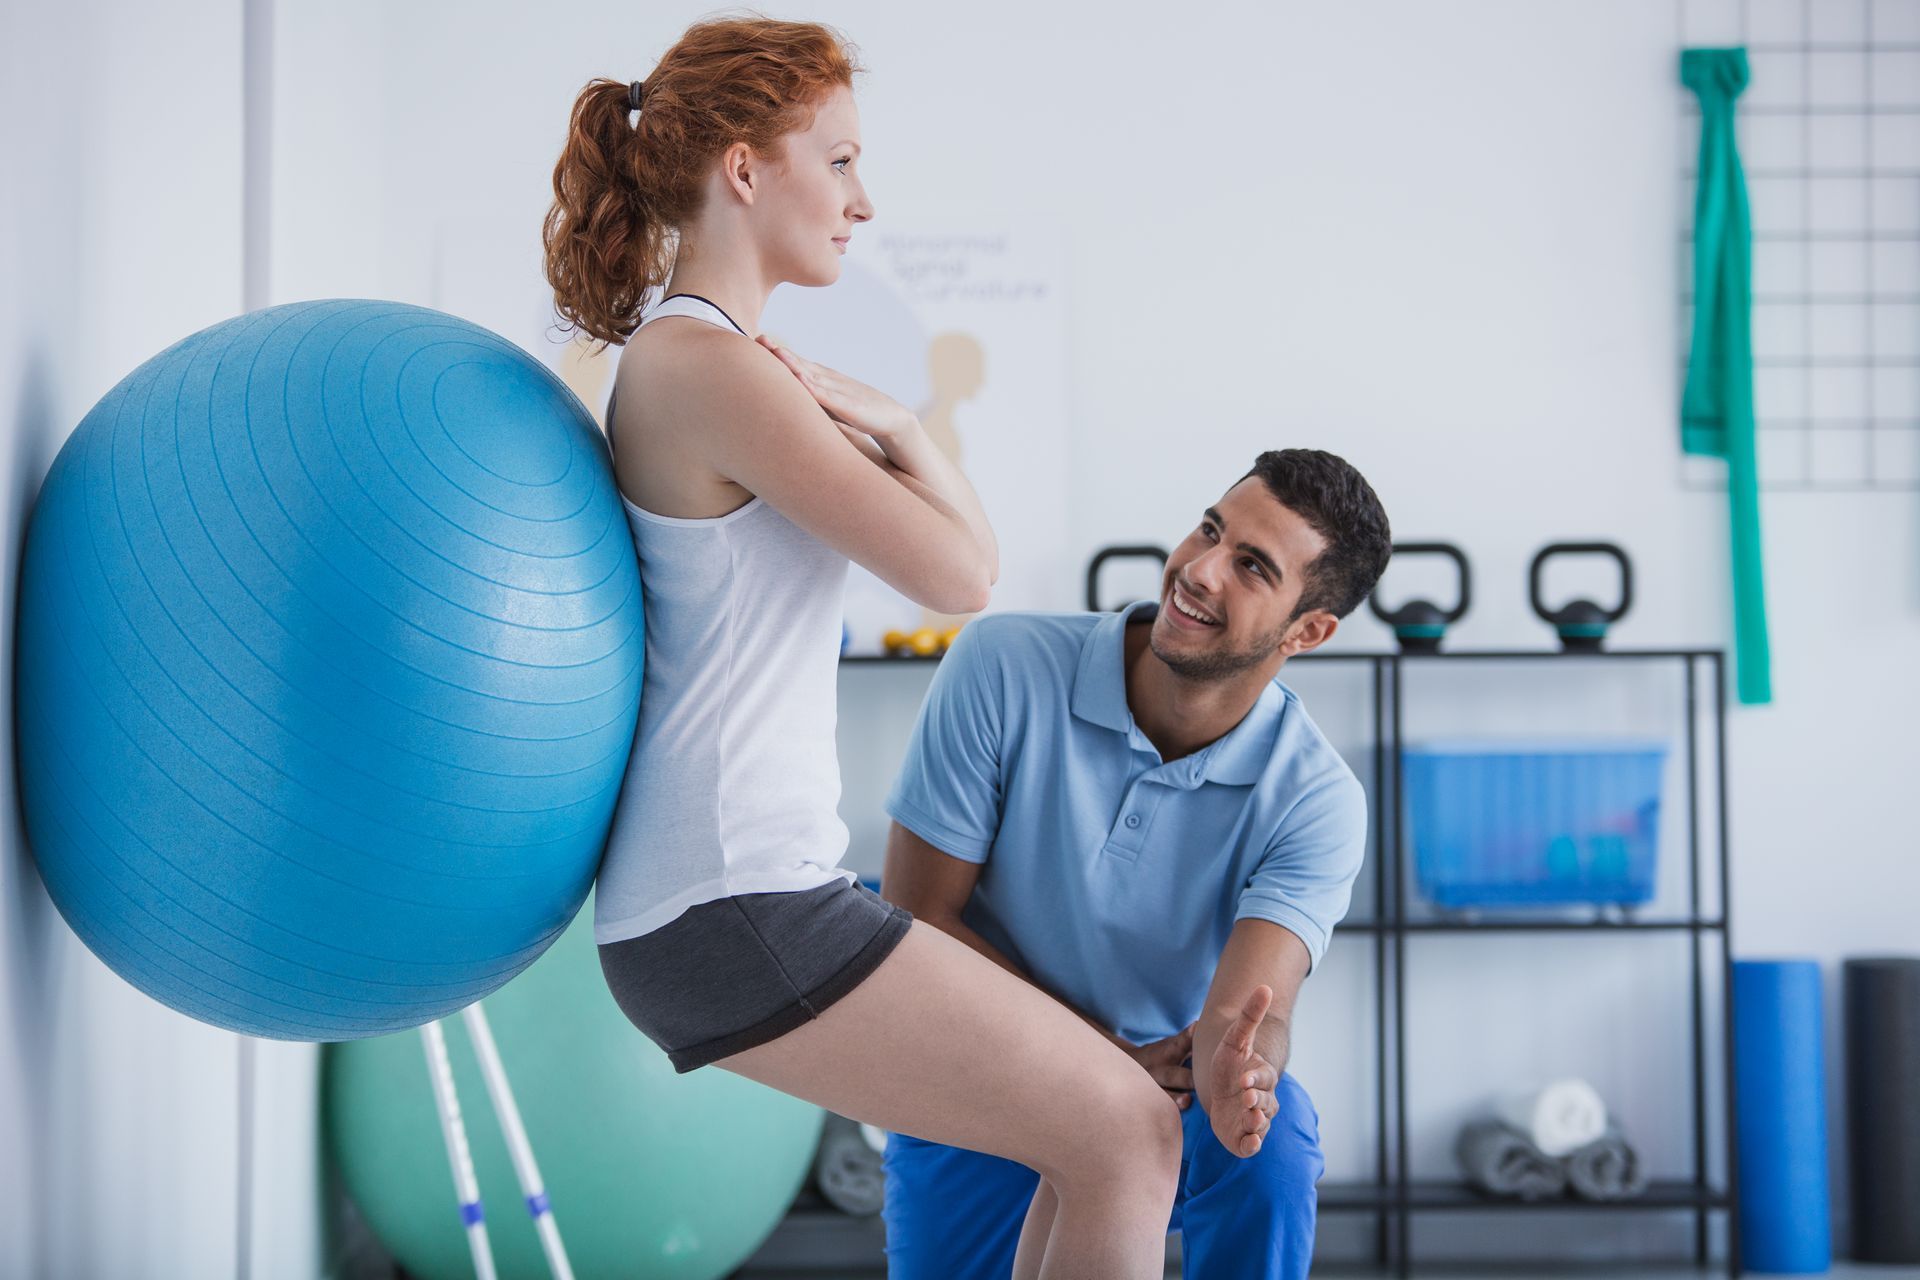 a man is helping a woman with a pilates ball in a gym .